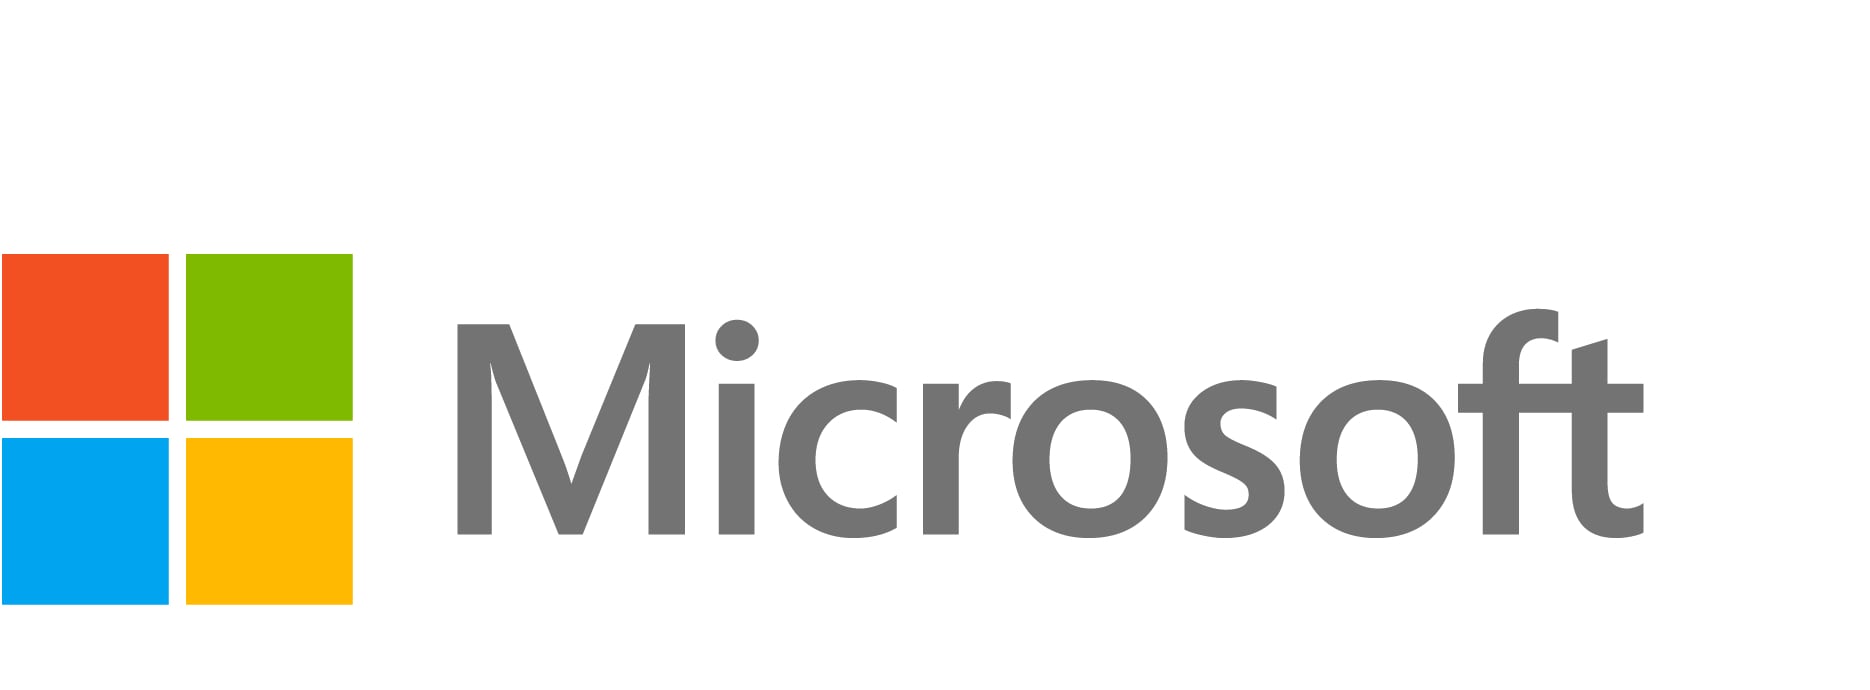 Microsoft Common Data Service for Apps Log Capacity - subscription license - 1 GB capacity